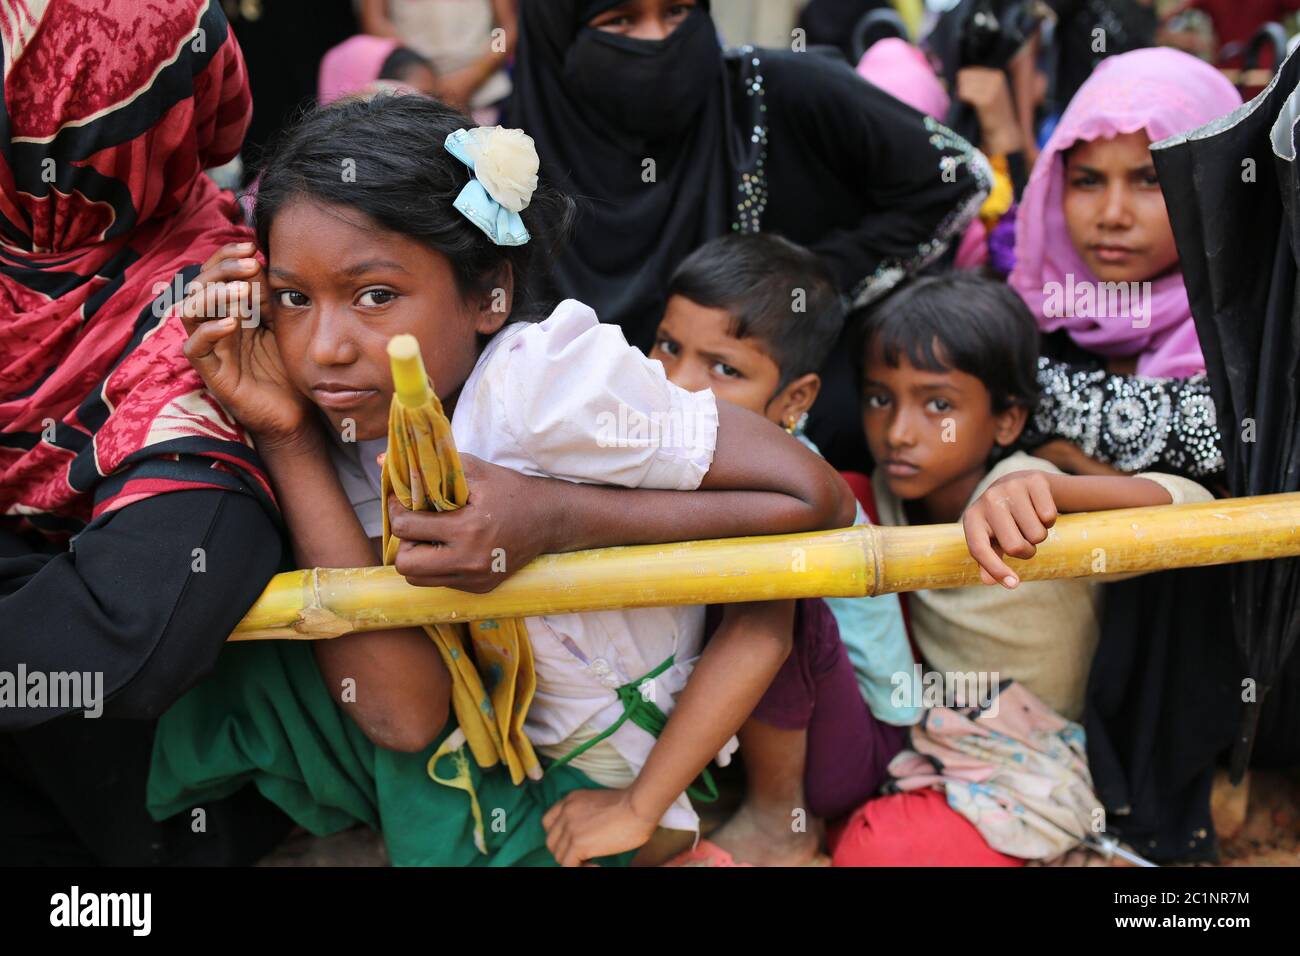 Rohingya people gather to collect food aid at Thangkhali refugee camp in Cox's Bazar, Bangladesh, Thursday, Oct. 5, 2017. Stock Photo